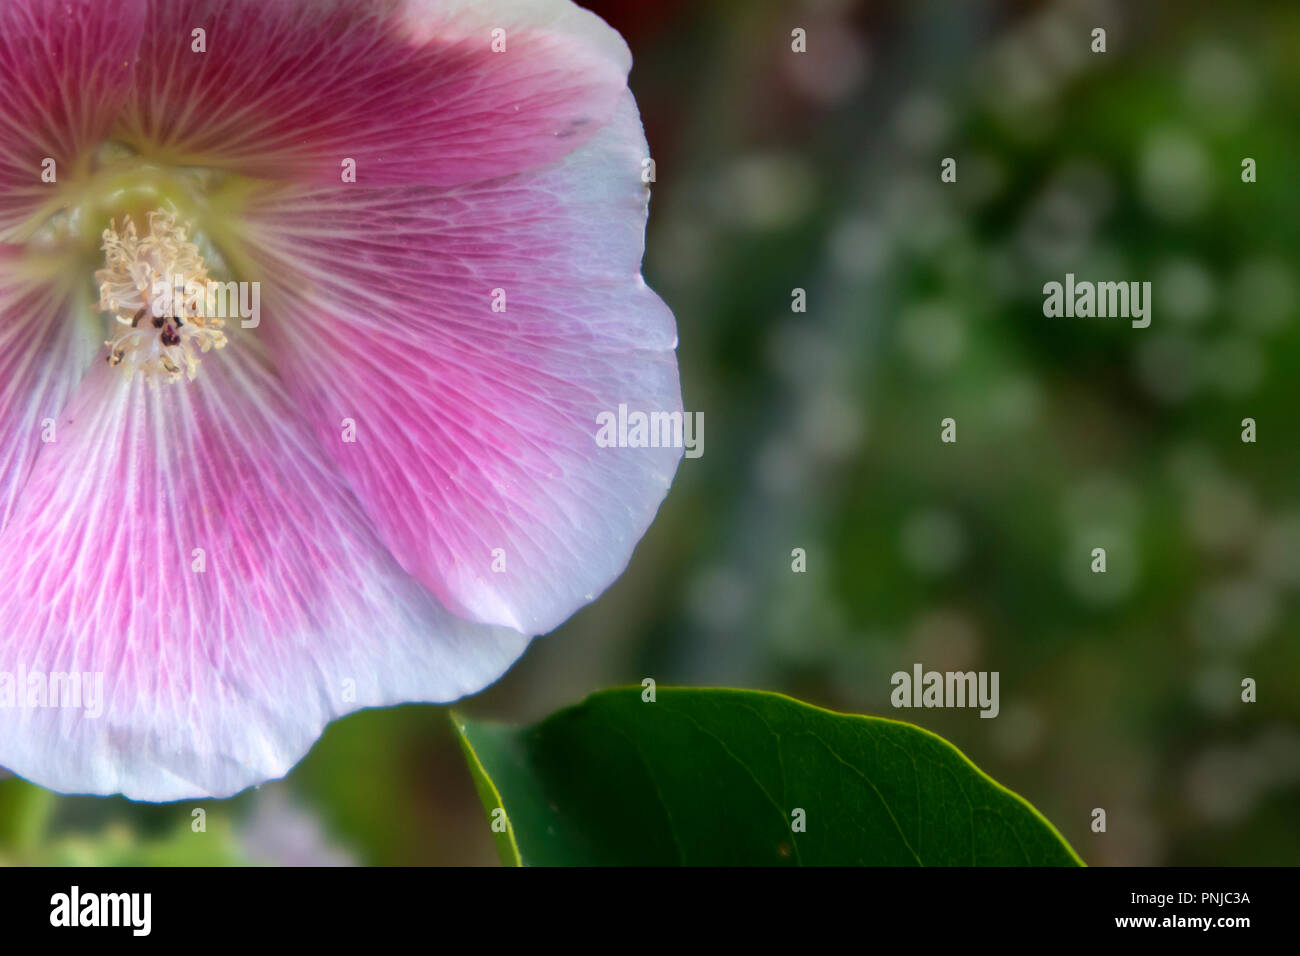 Pale pink romantic garden flower with white border against blurred herbal background with space for text Stock Photo